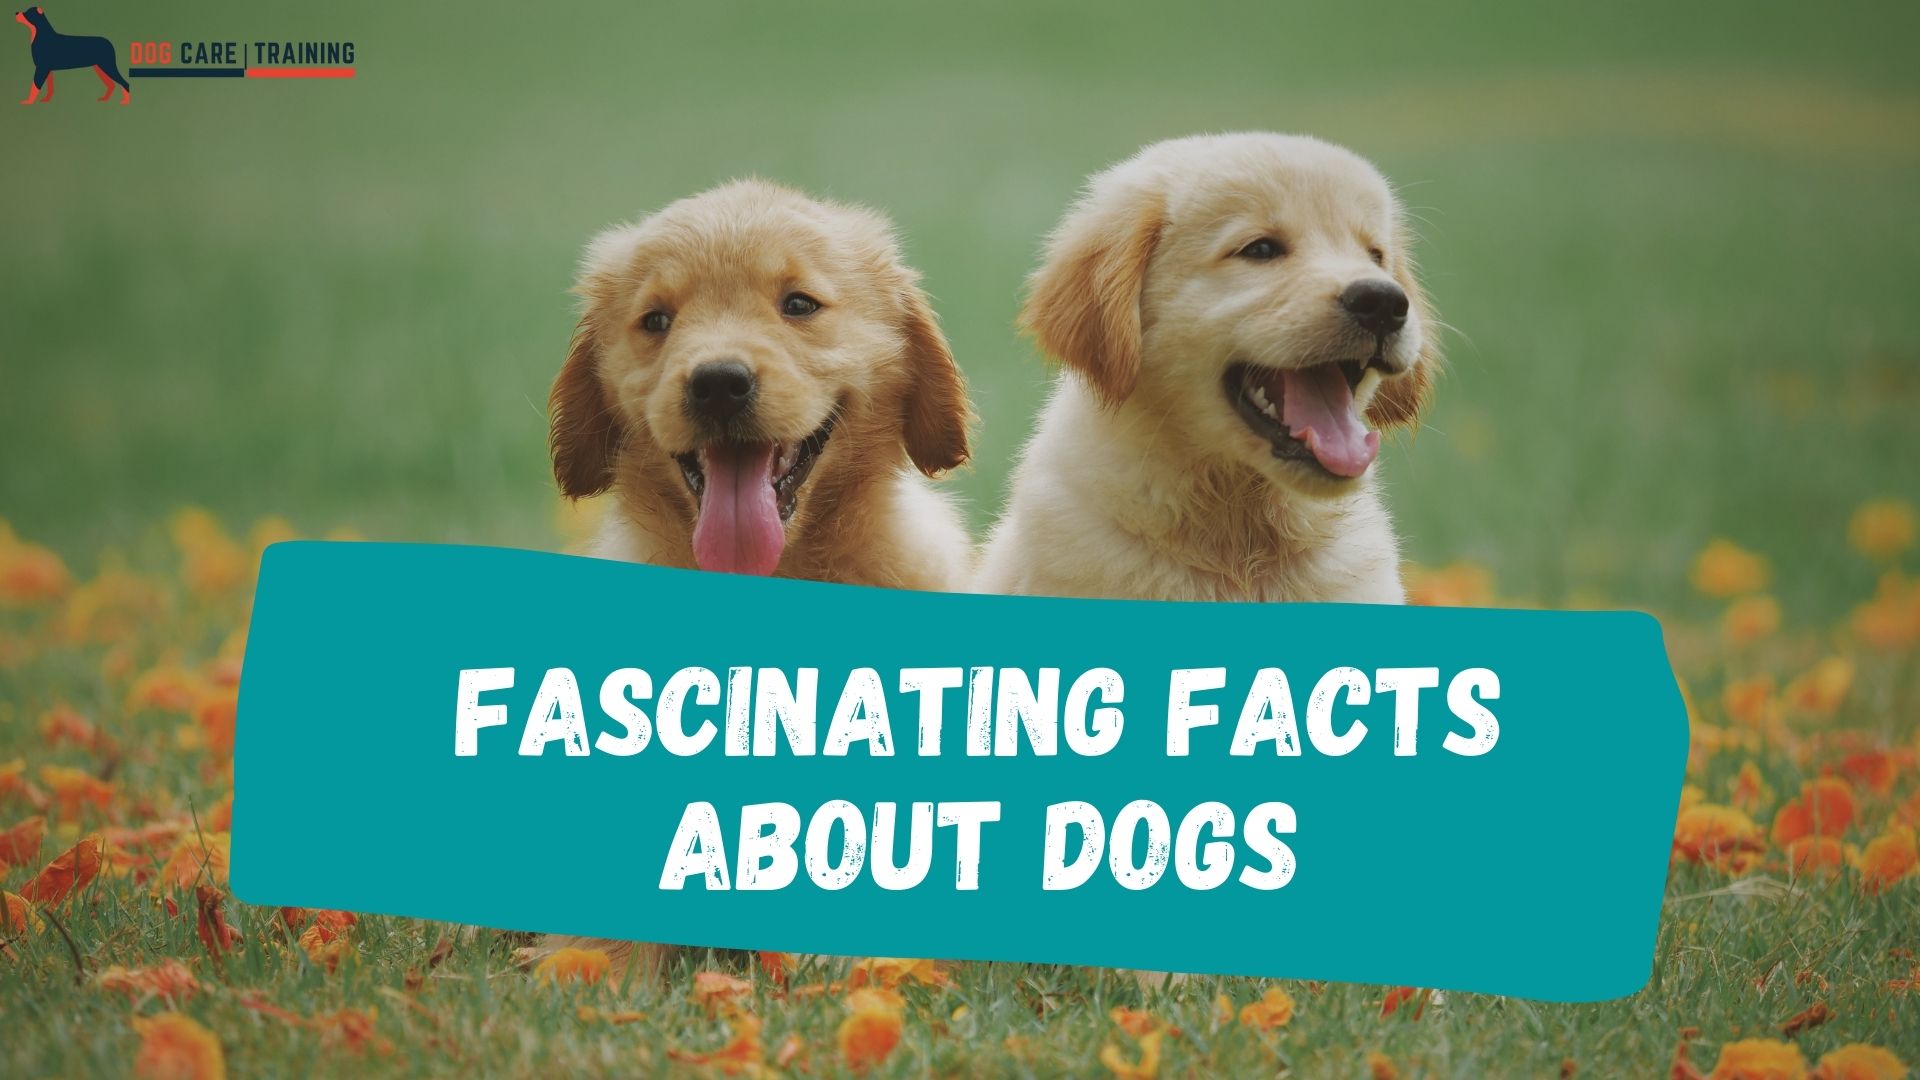 6 Fascinating Facts About Dogs